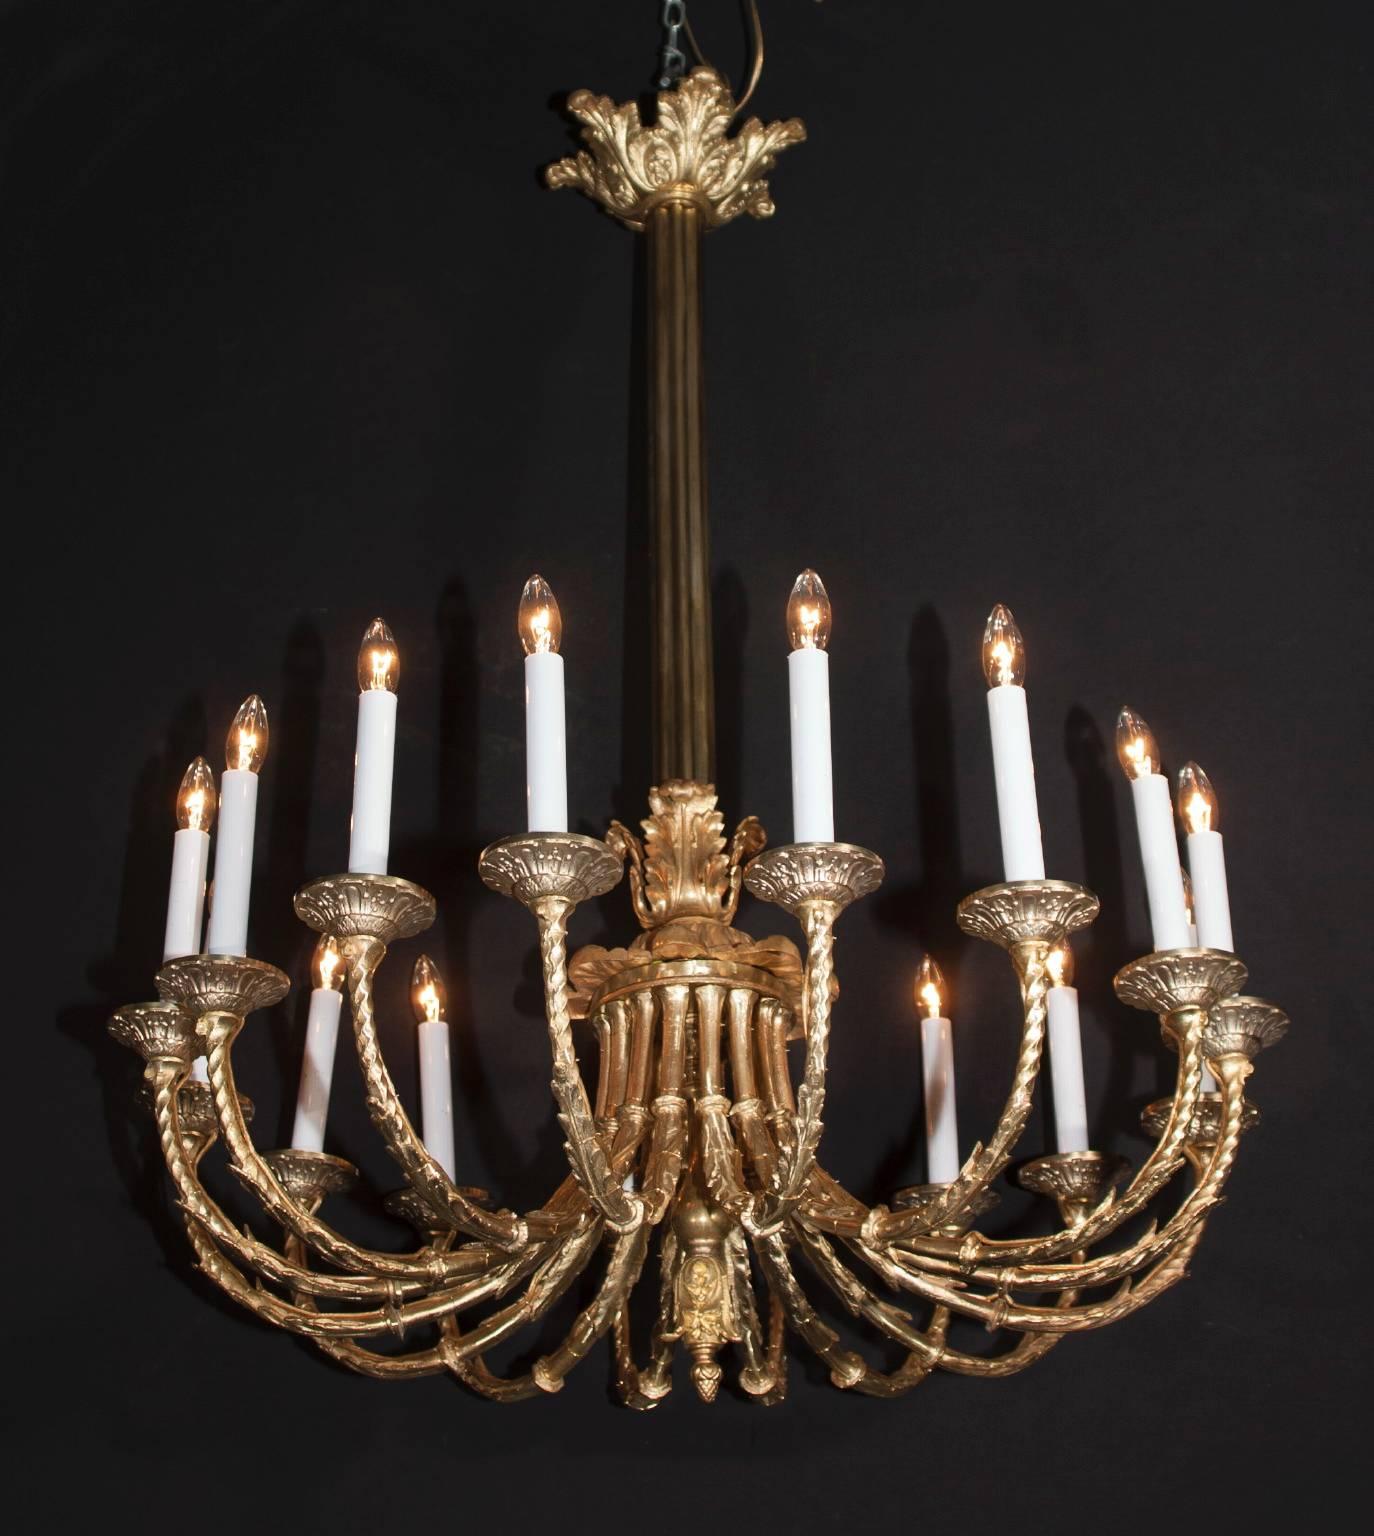 This classic Belle Époque chandelier is made of bronze and features an impressive 16 burnished bronze arms. The French antique fixture dates back to the late 19th century and plays host to a beautiful and simple acanthus leaf crown at top. The arms